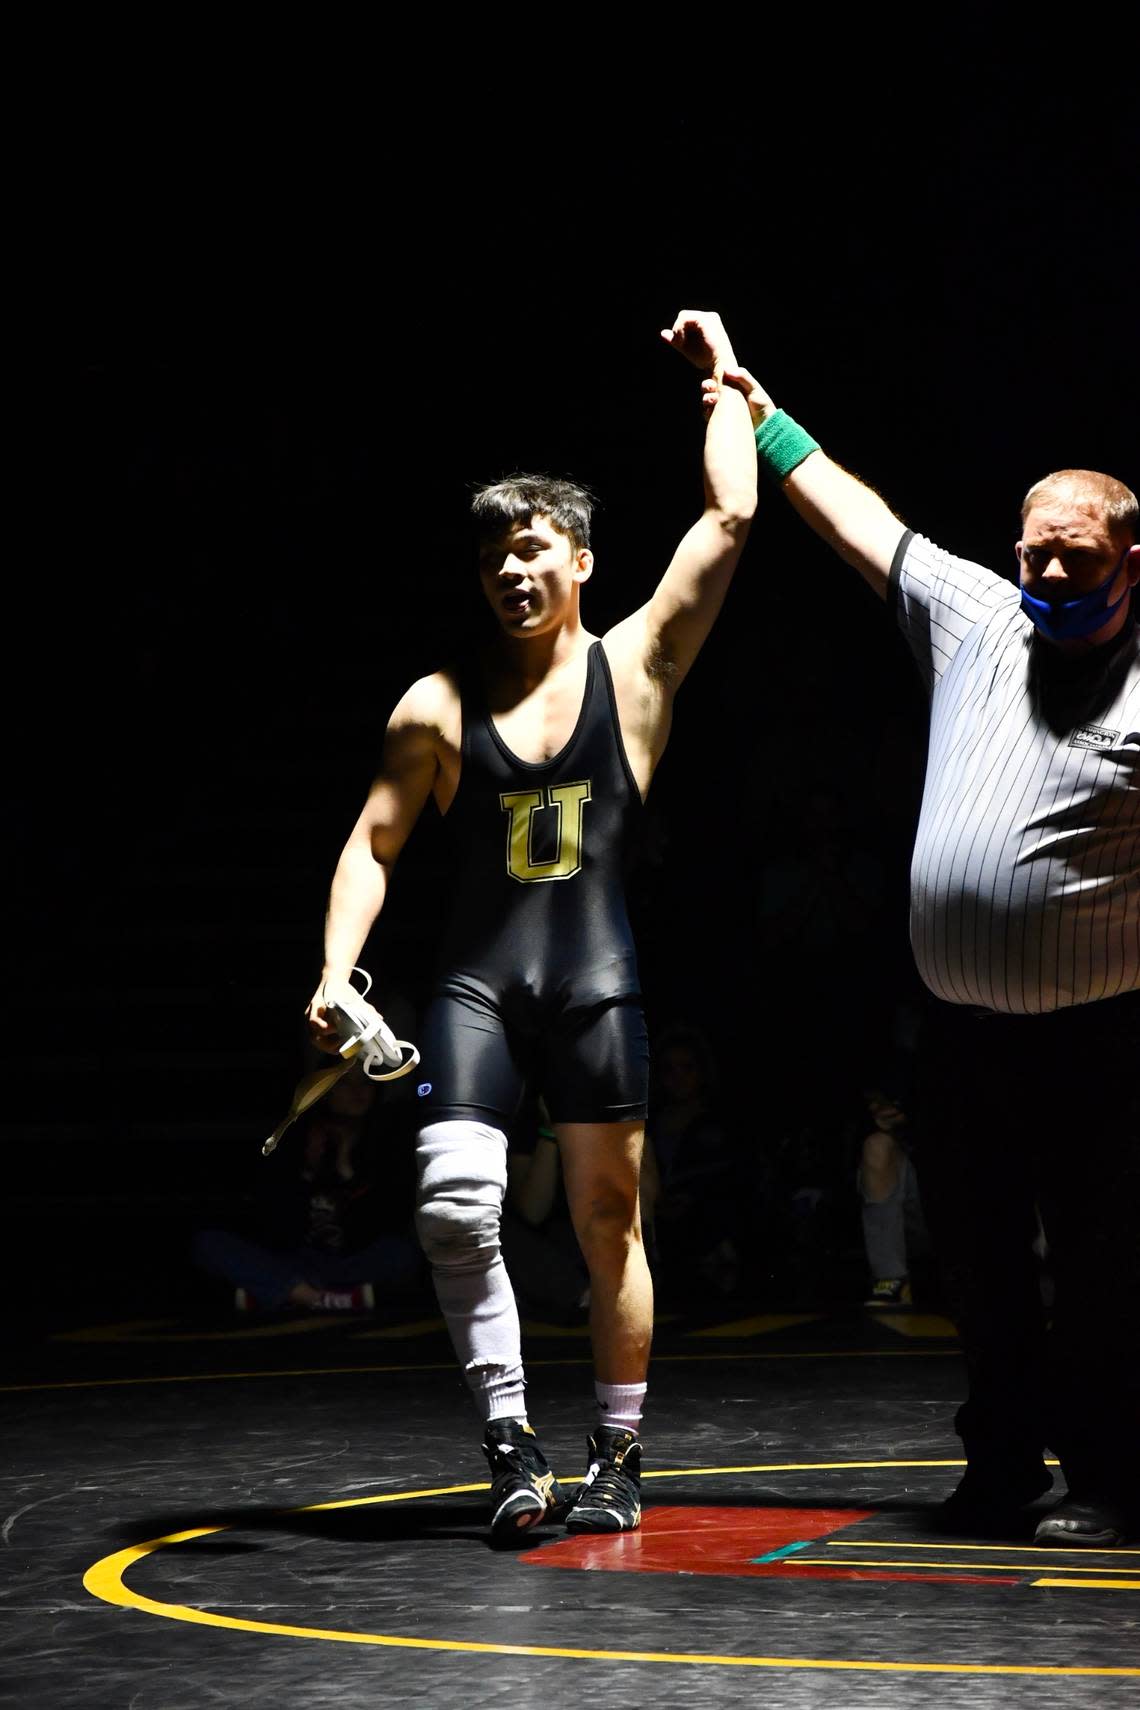 University’s Q’veli Quintanilla is part of The News Tribune’s 2023 class of Untouchables, the state’s most dominant high school wrestlers.